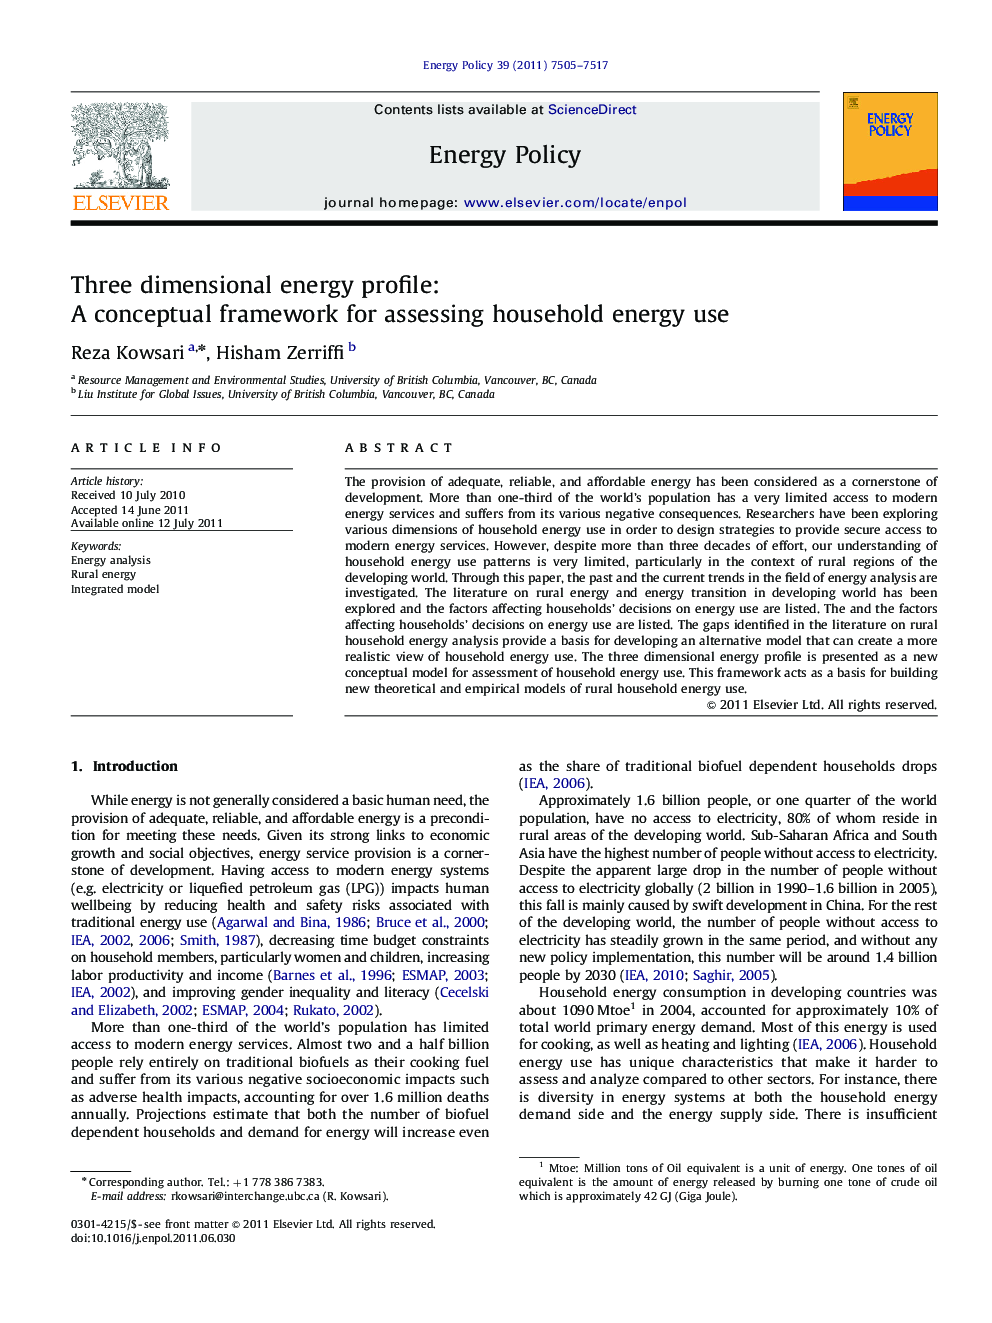 Three dimensional energy profile:: A conceptual framework for assessing household energy use